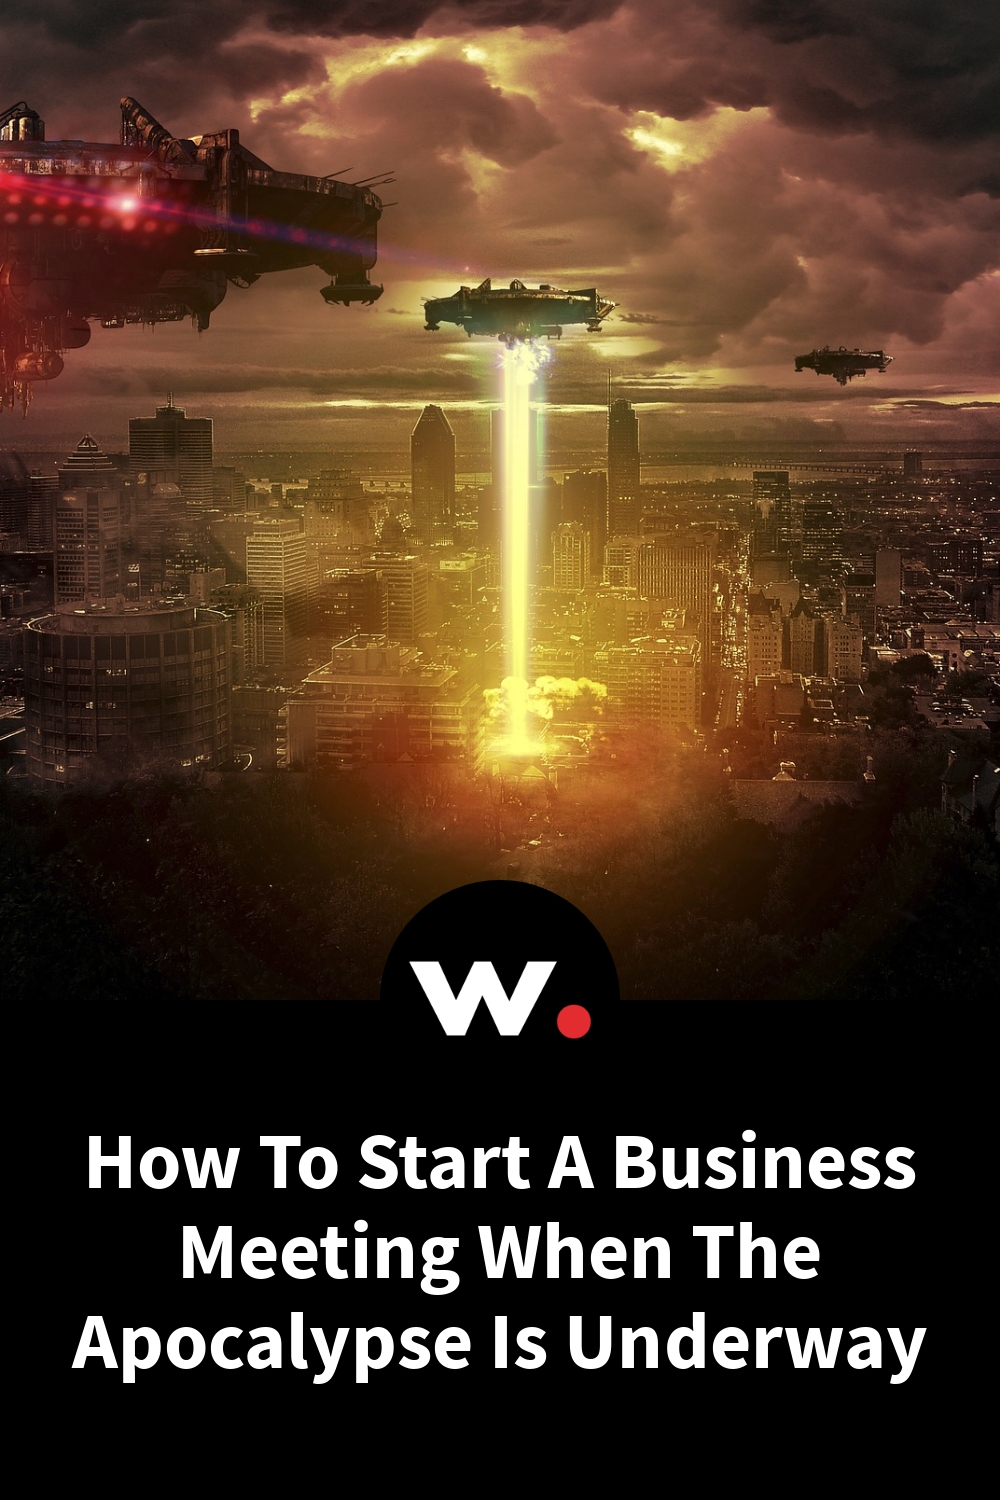 How To Start A Business Meeting When The Apocalypse Is Underway